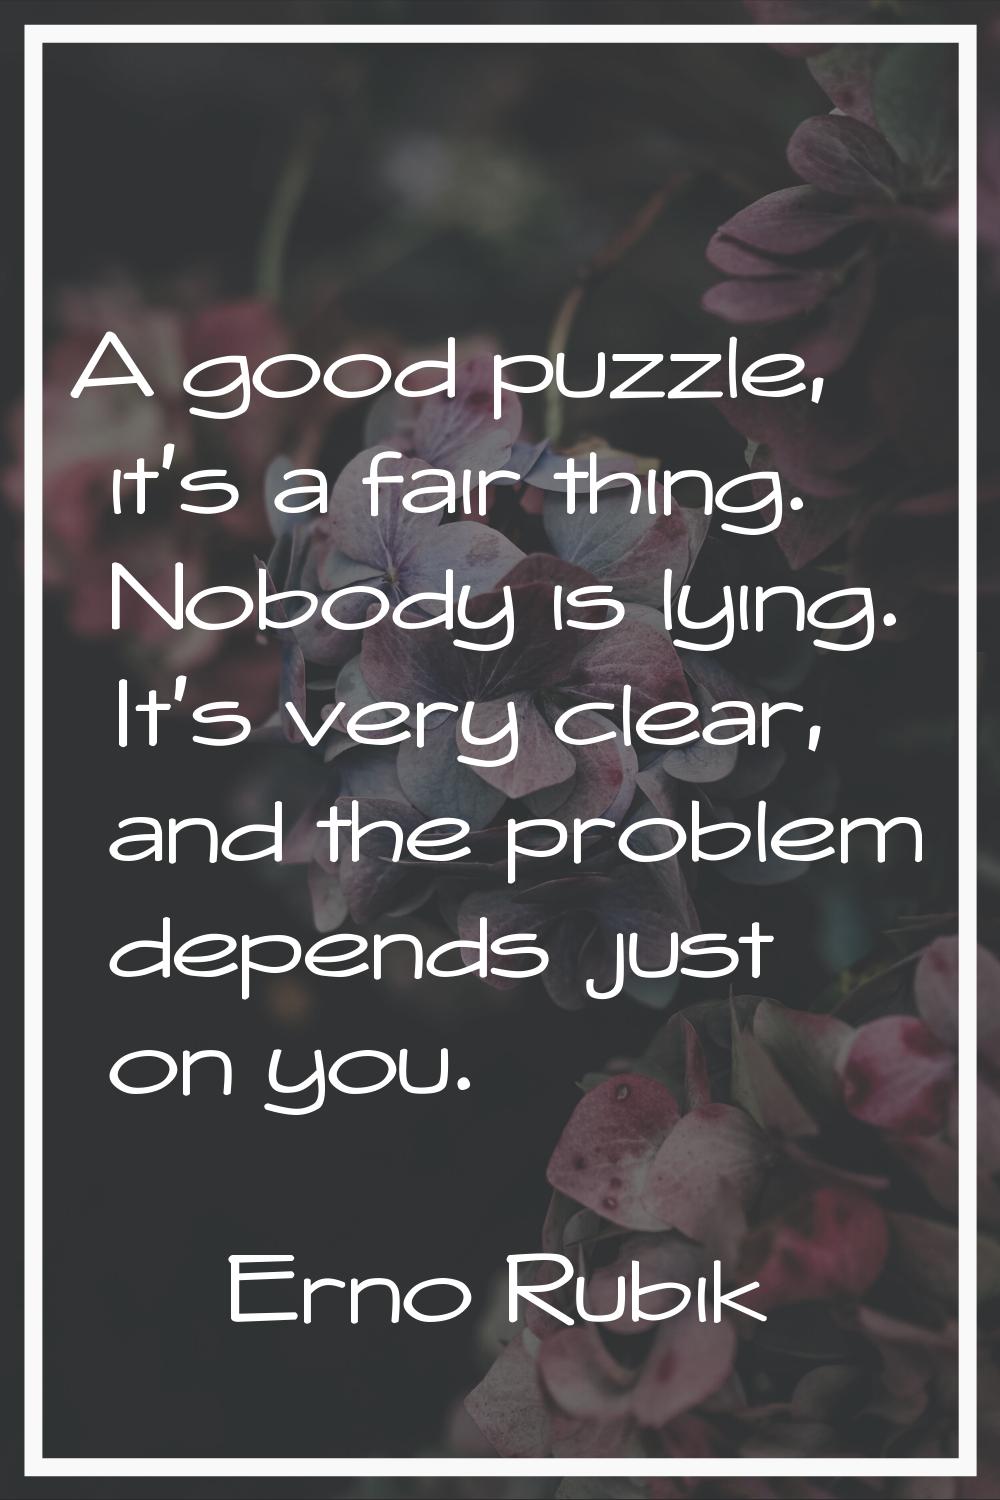 A good puzzle, it's a fair thing. Nobody is lying. It's very clear, and the problem depends just on